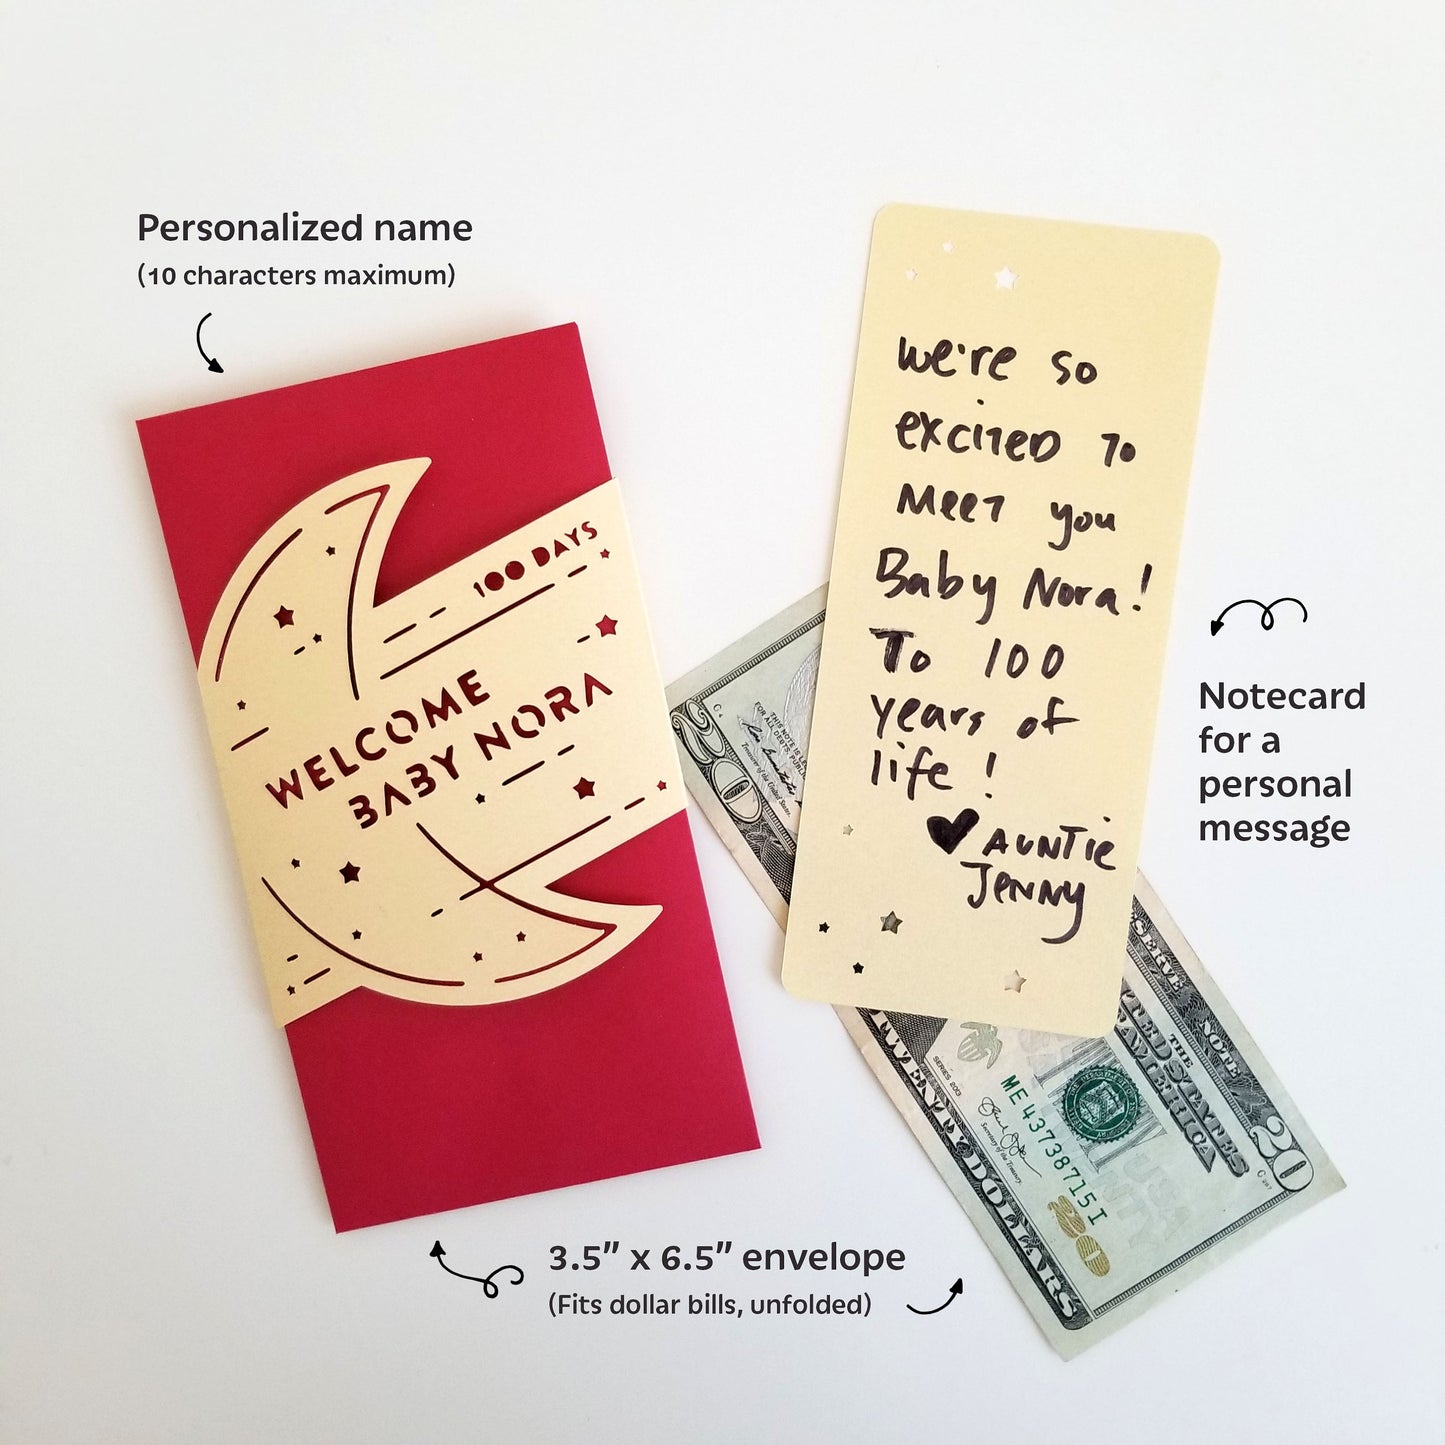 Full Moon / Man Yue Red Envelope, personalized